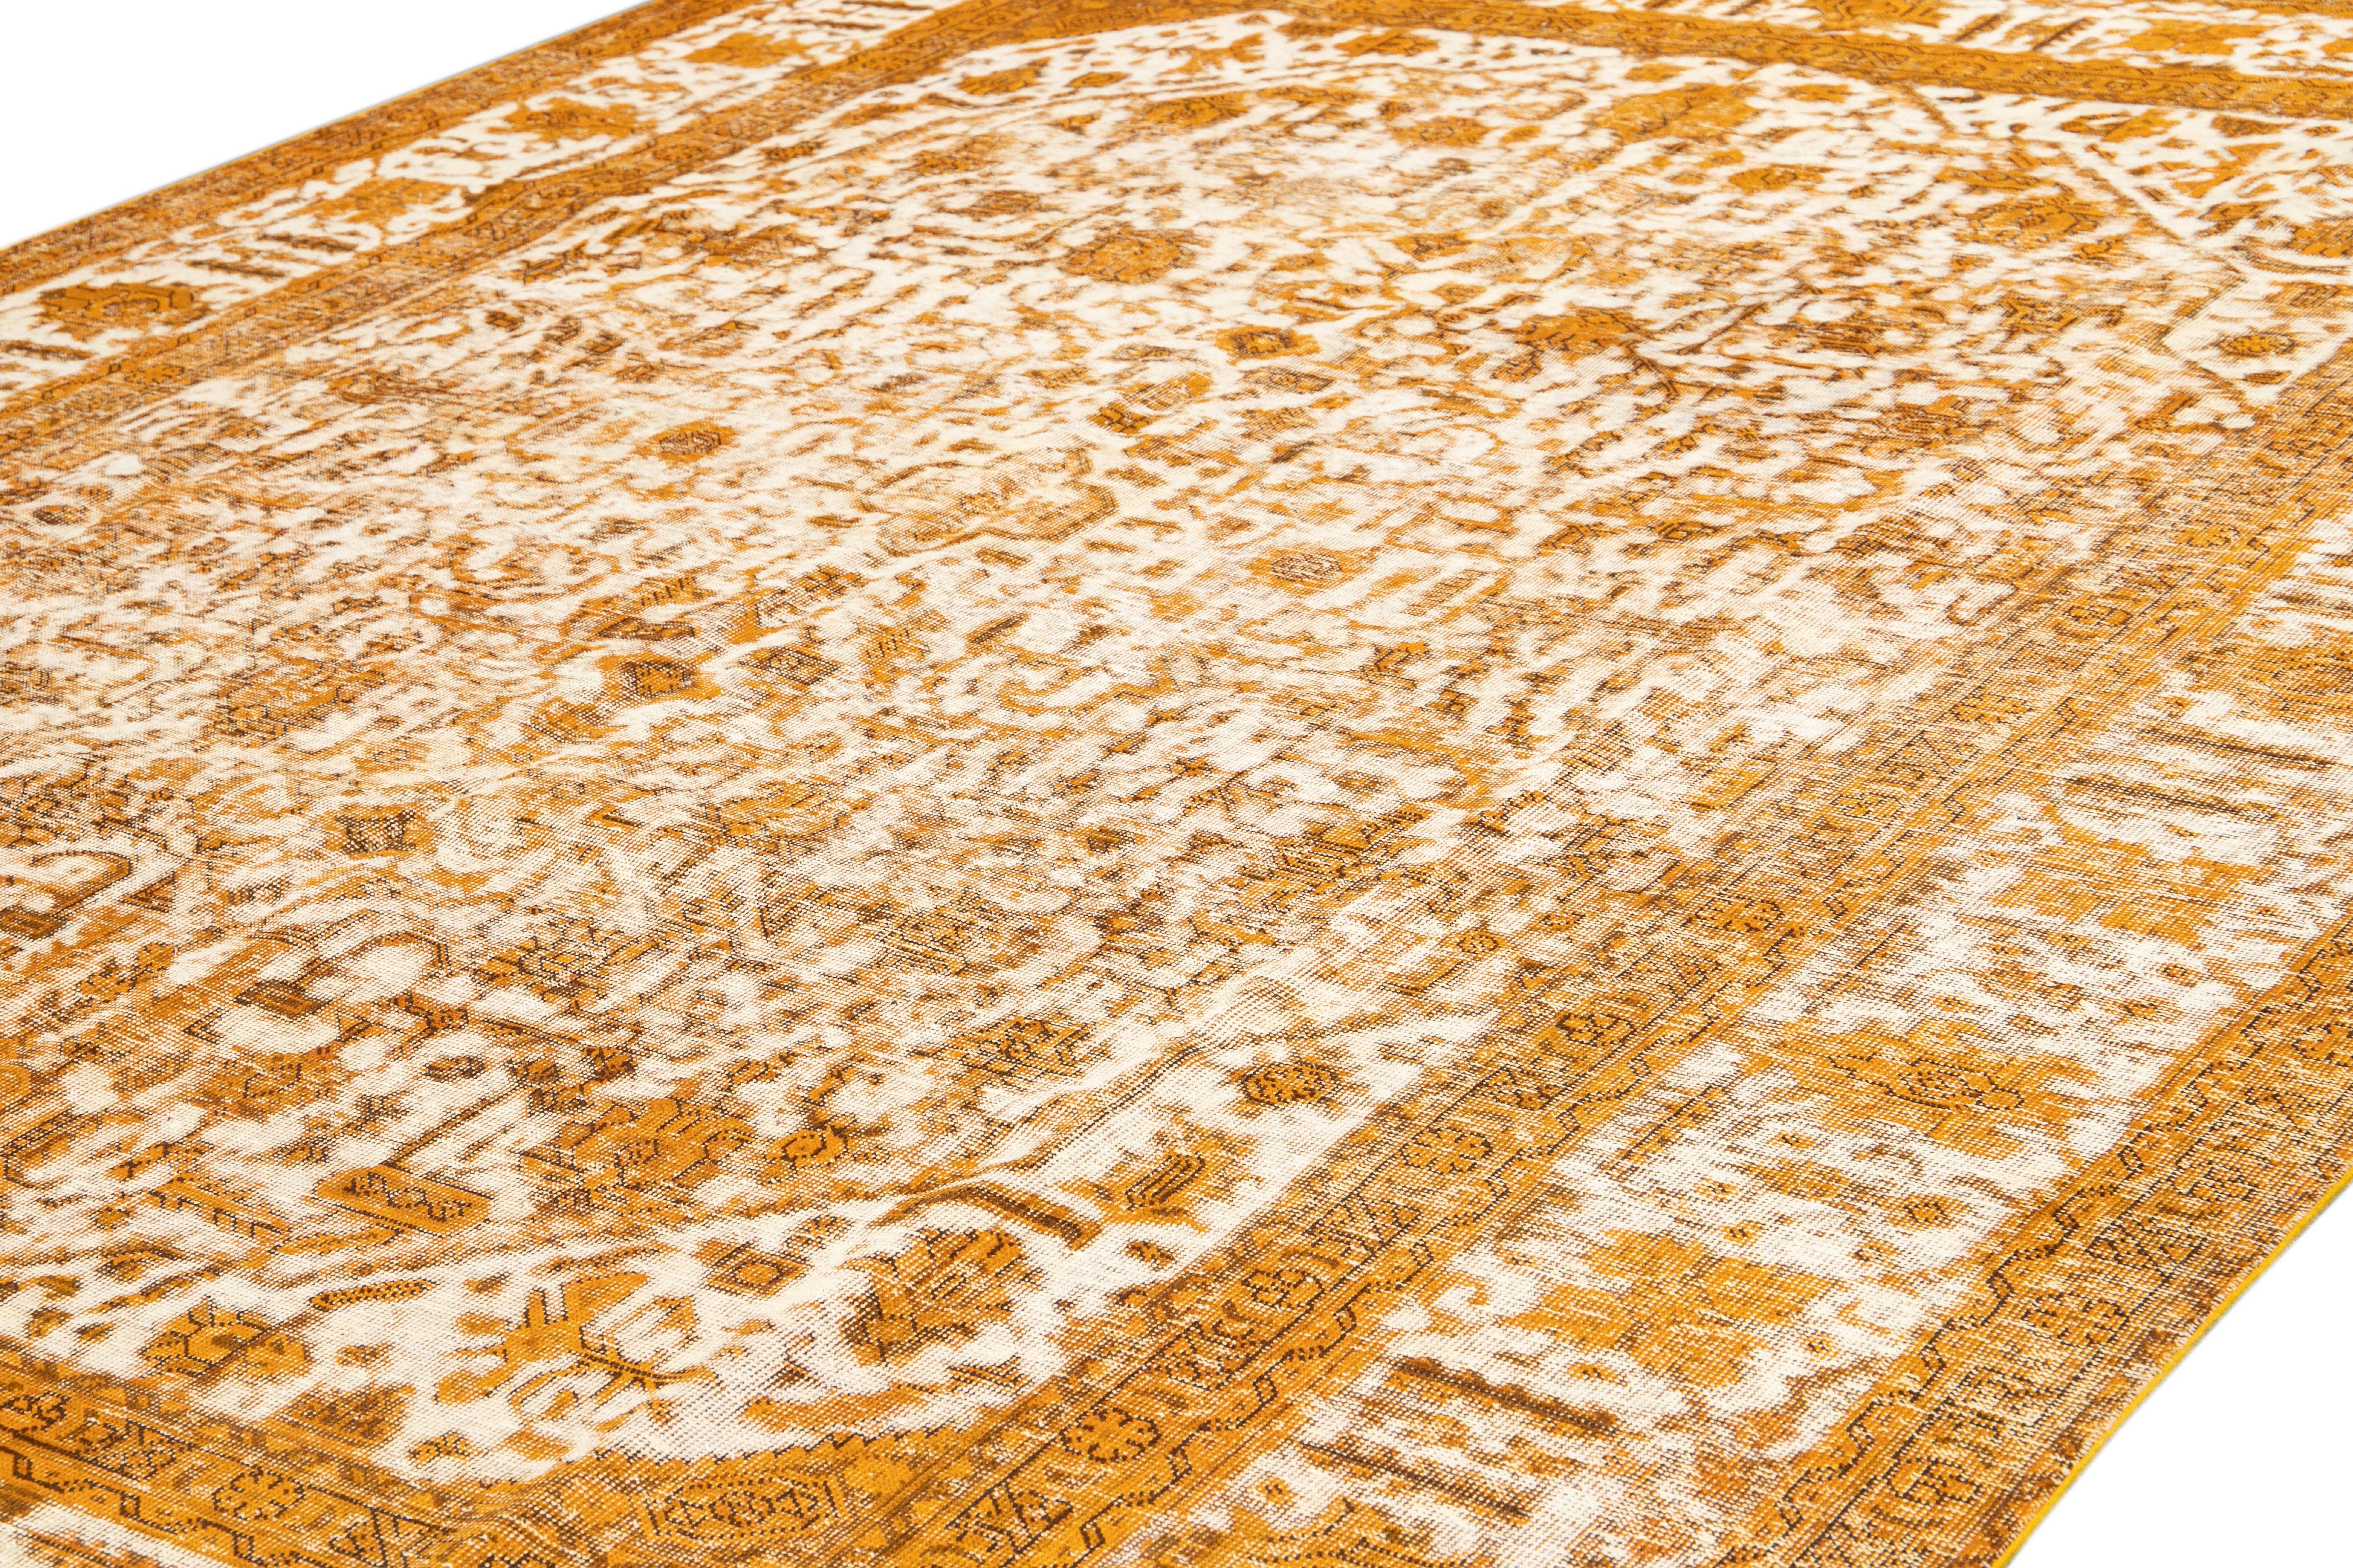 Islamic 1960s Allover Handmade Vintage Overdyed Wool Rug in Orange and Beige Color For Sale